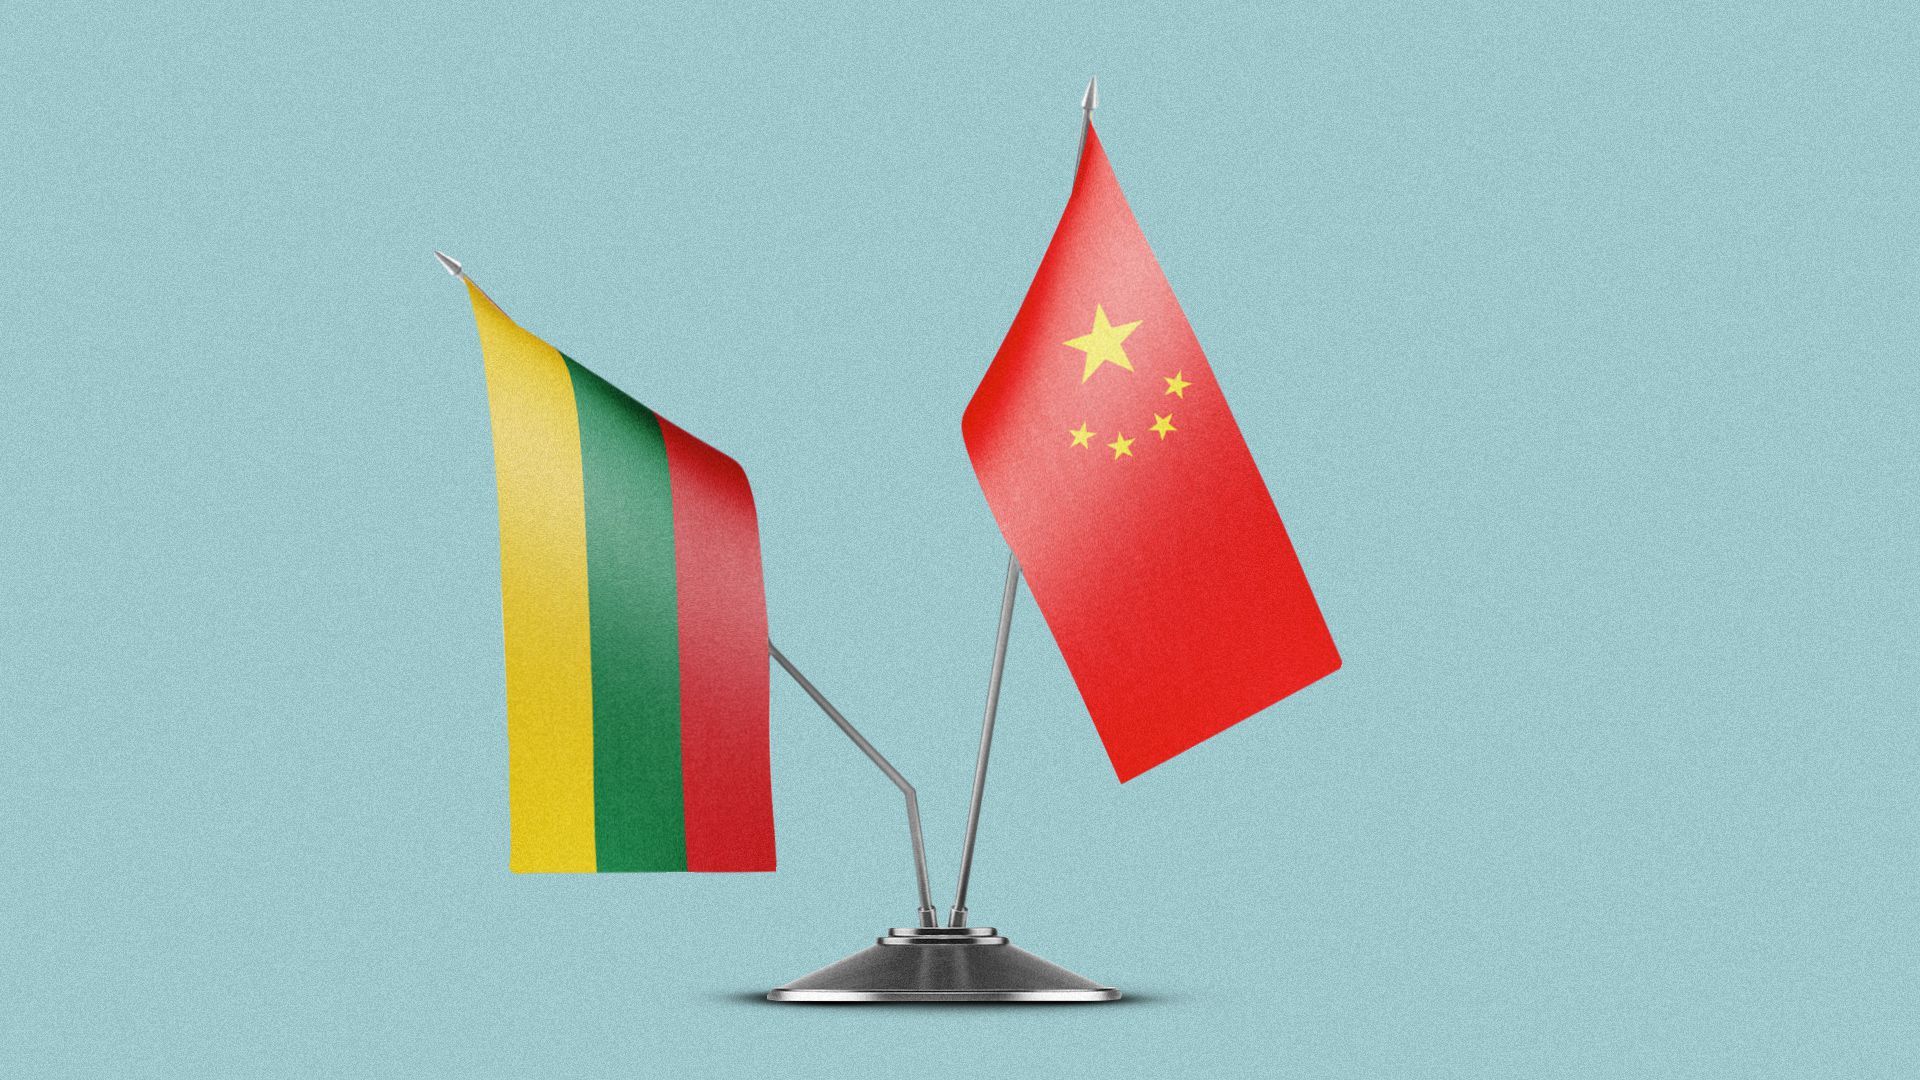 Illustration of miniature Lithuanian and Chinese flags in a holder with the Lithuanian flag pole slightly bent.